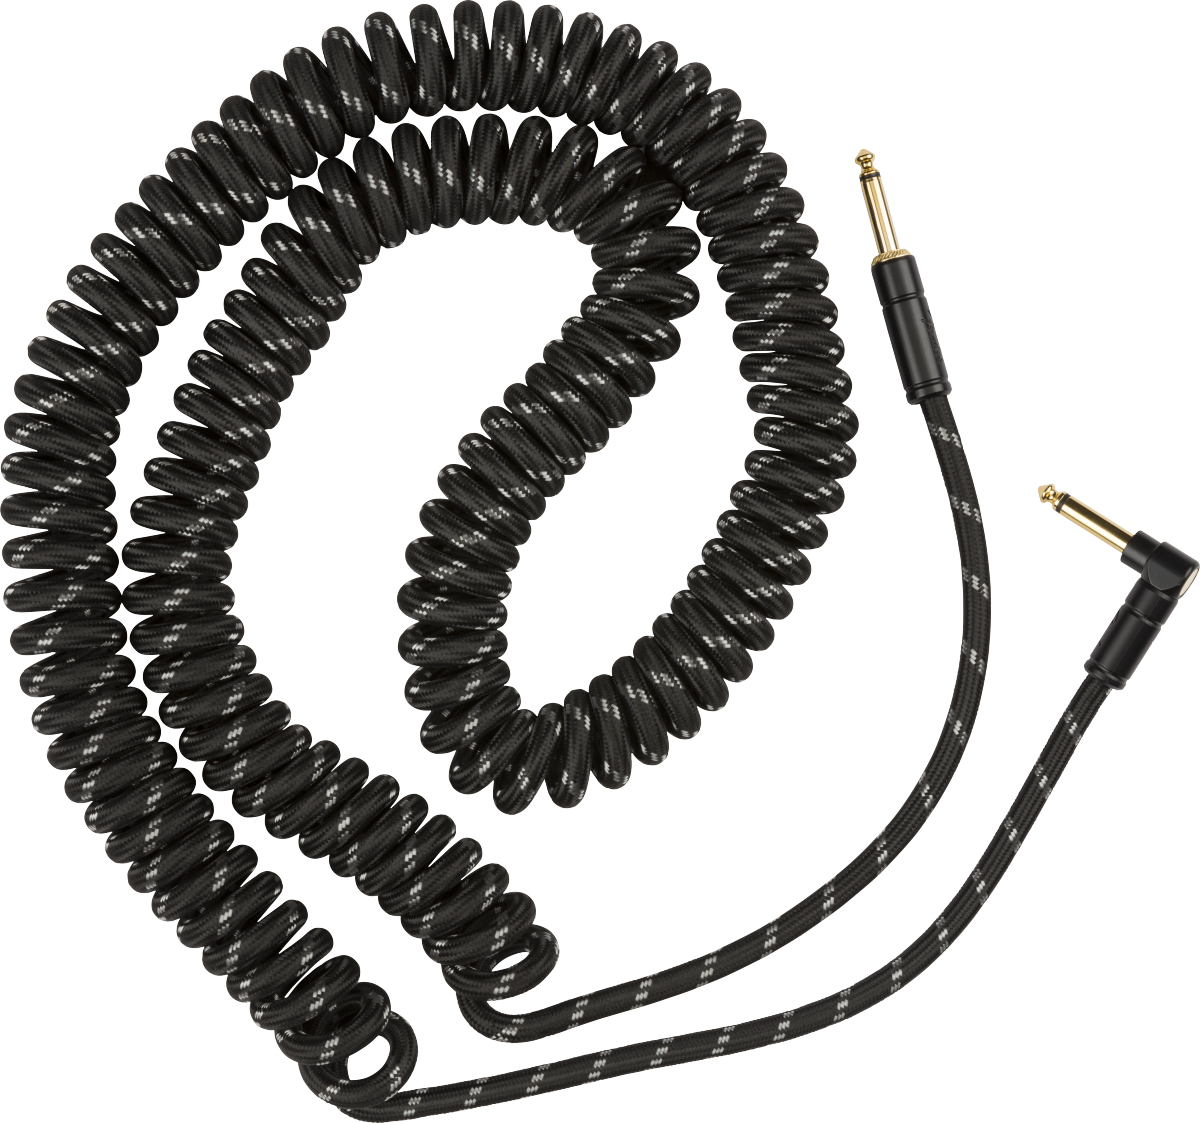 FENDER DELUXE COIL CABLE 30' BLACK TWEED